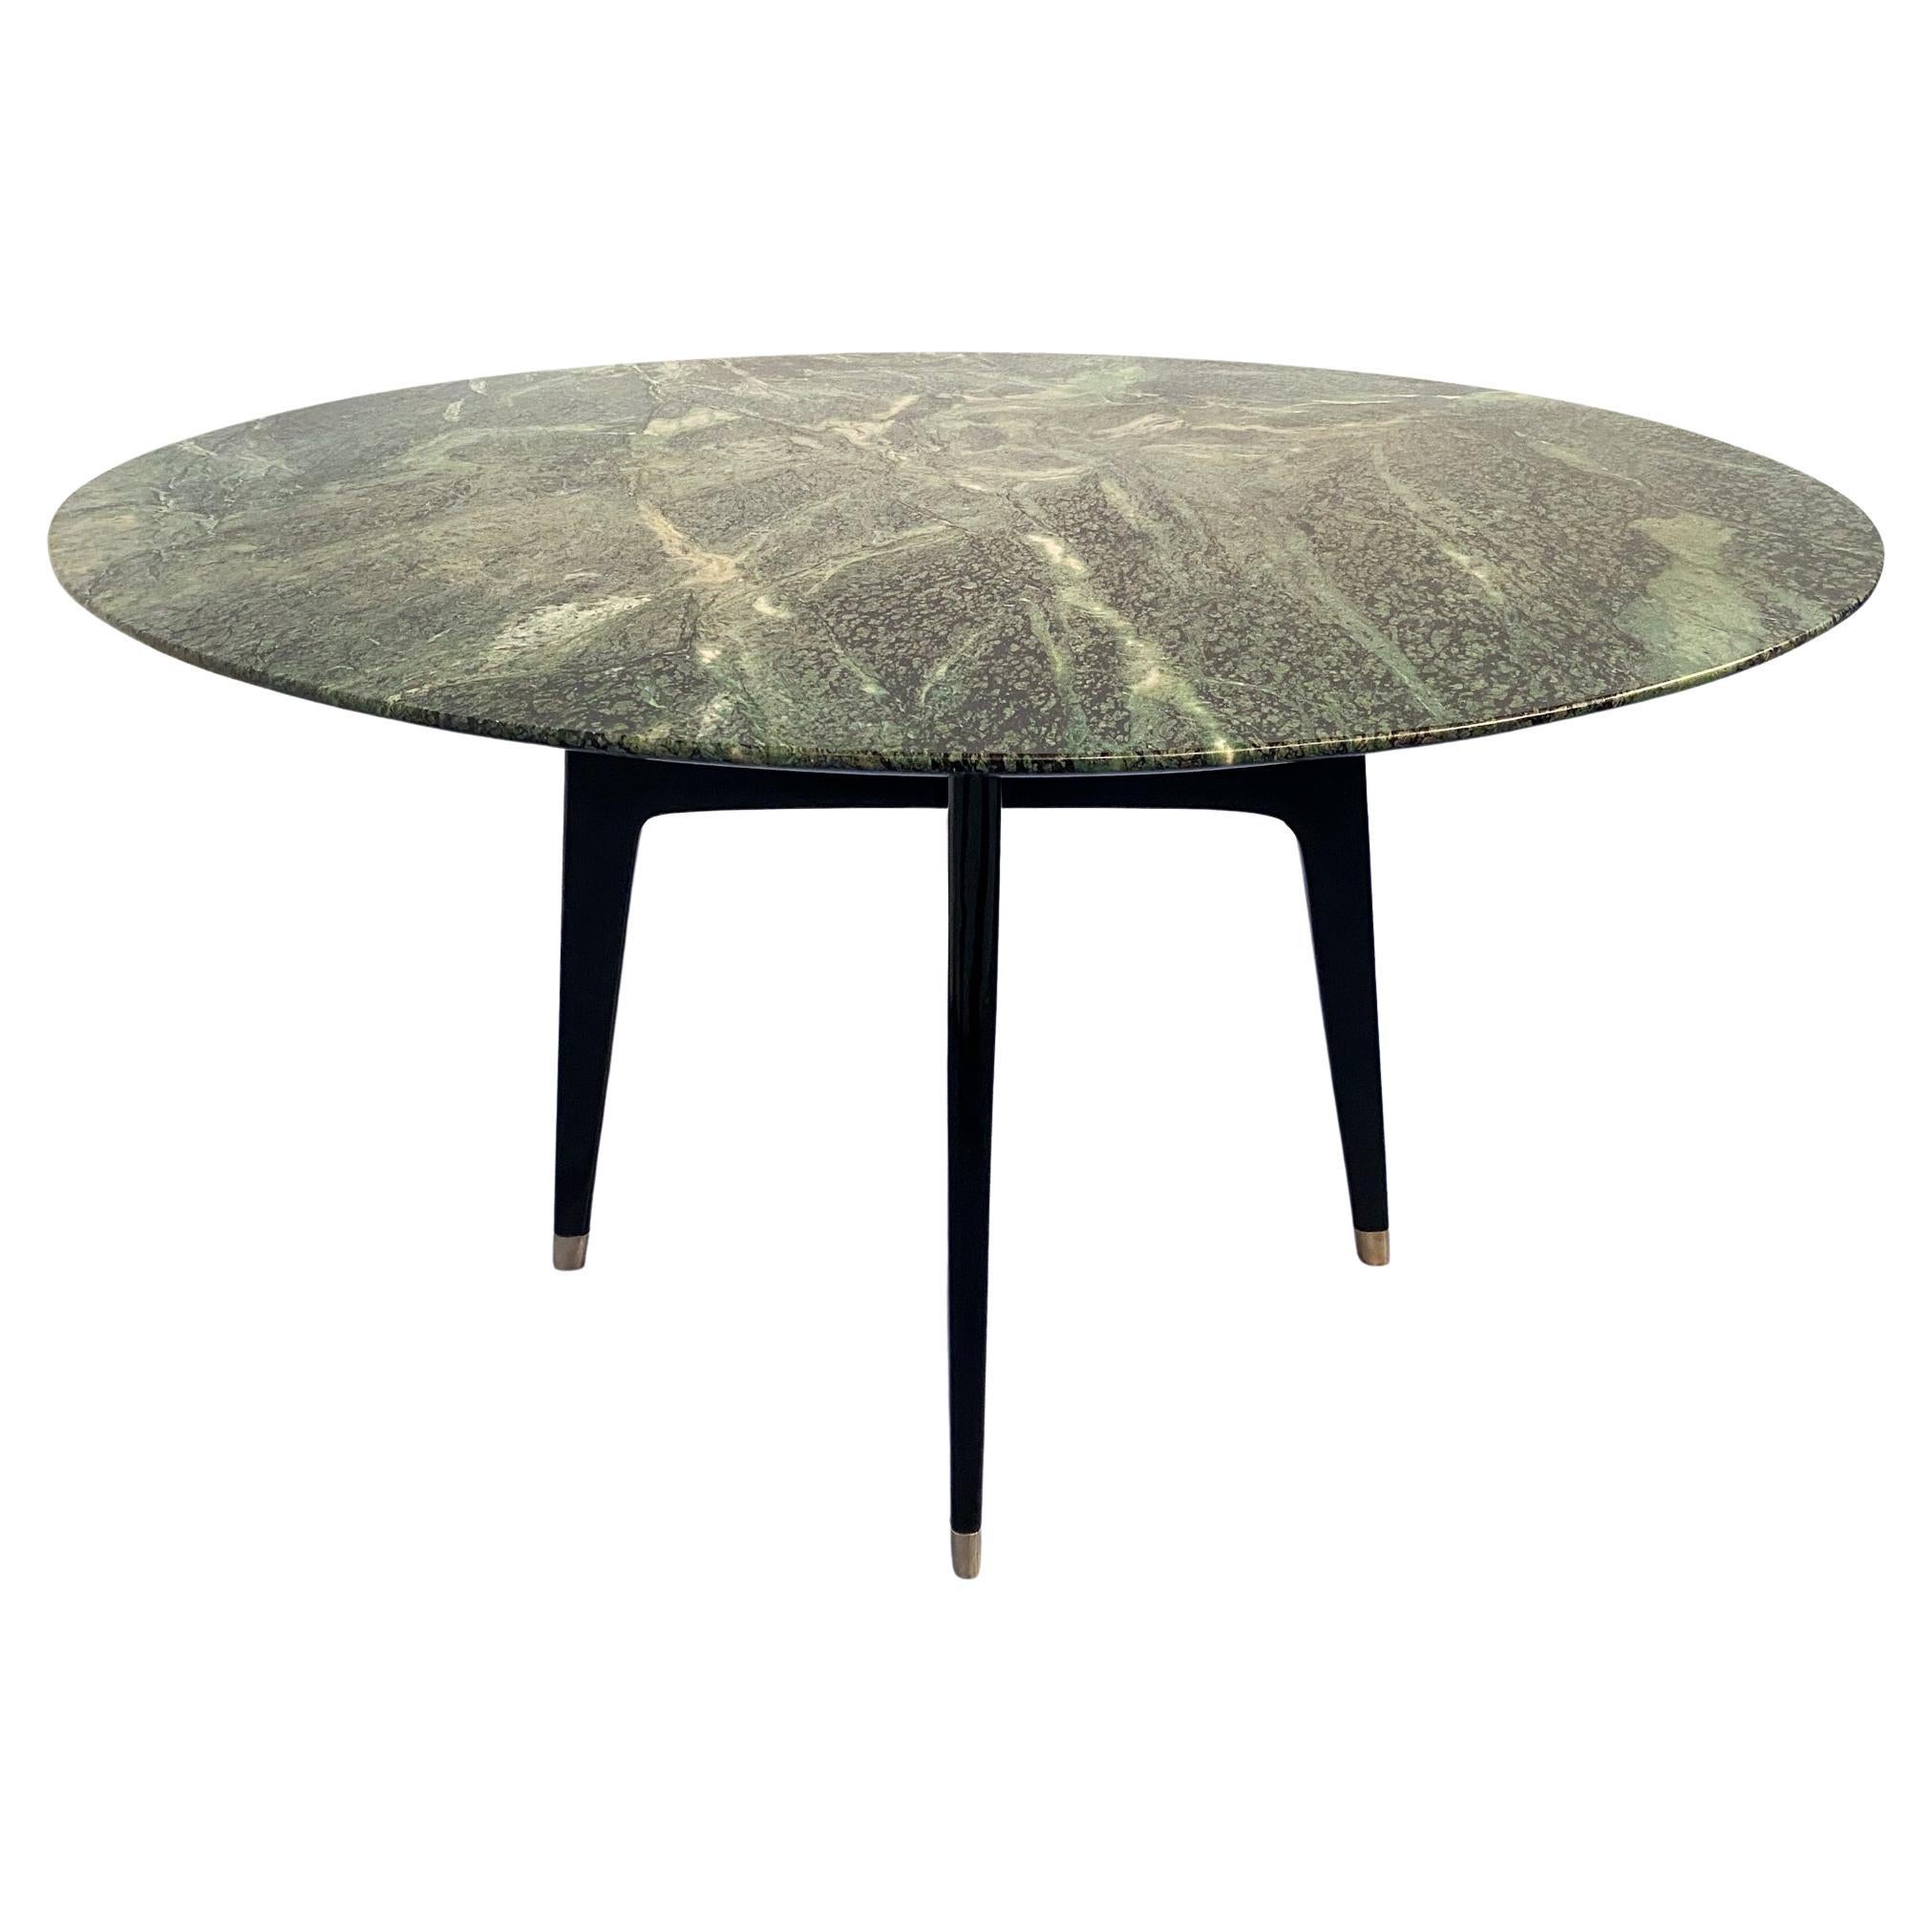 Italian Mid-Century  Marble Round Support or Center Table, by  Dassi 1950s For Sale